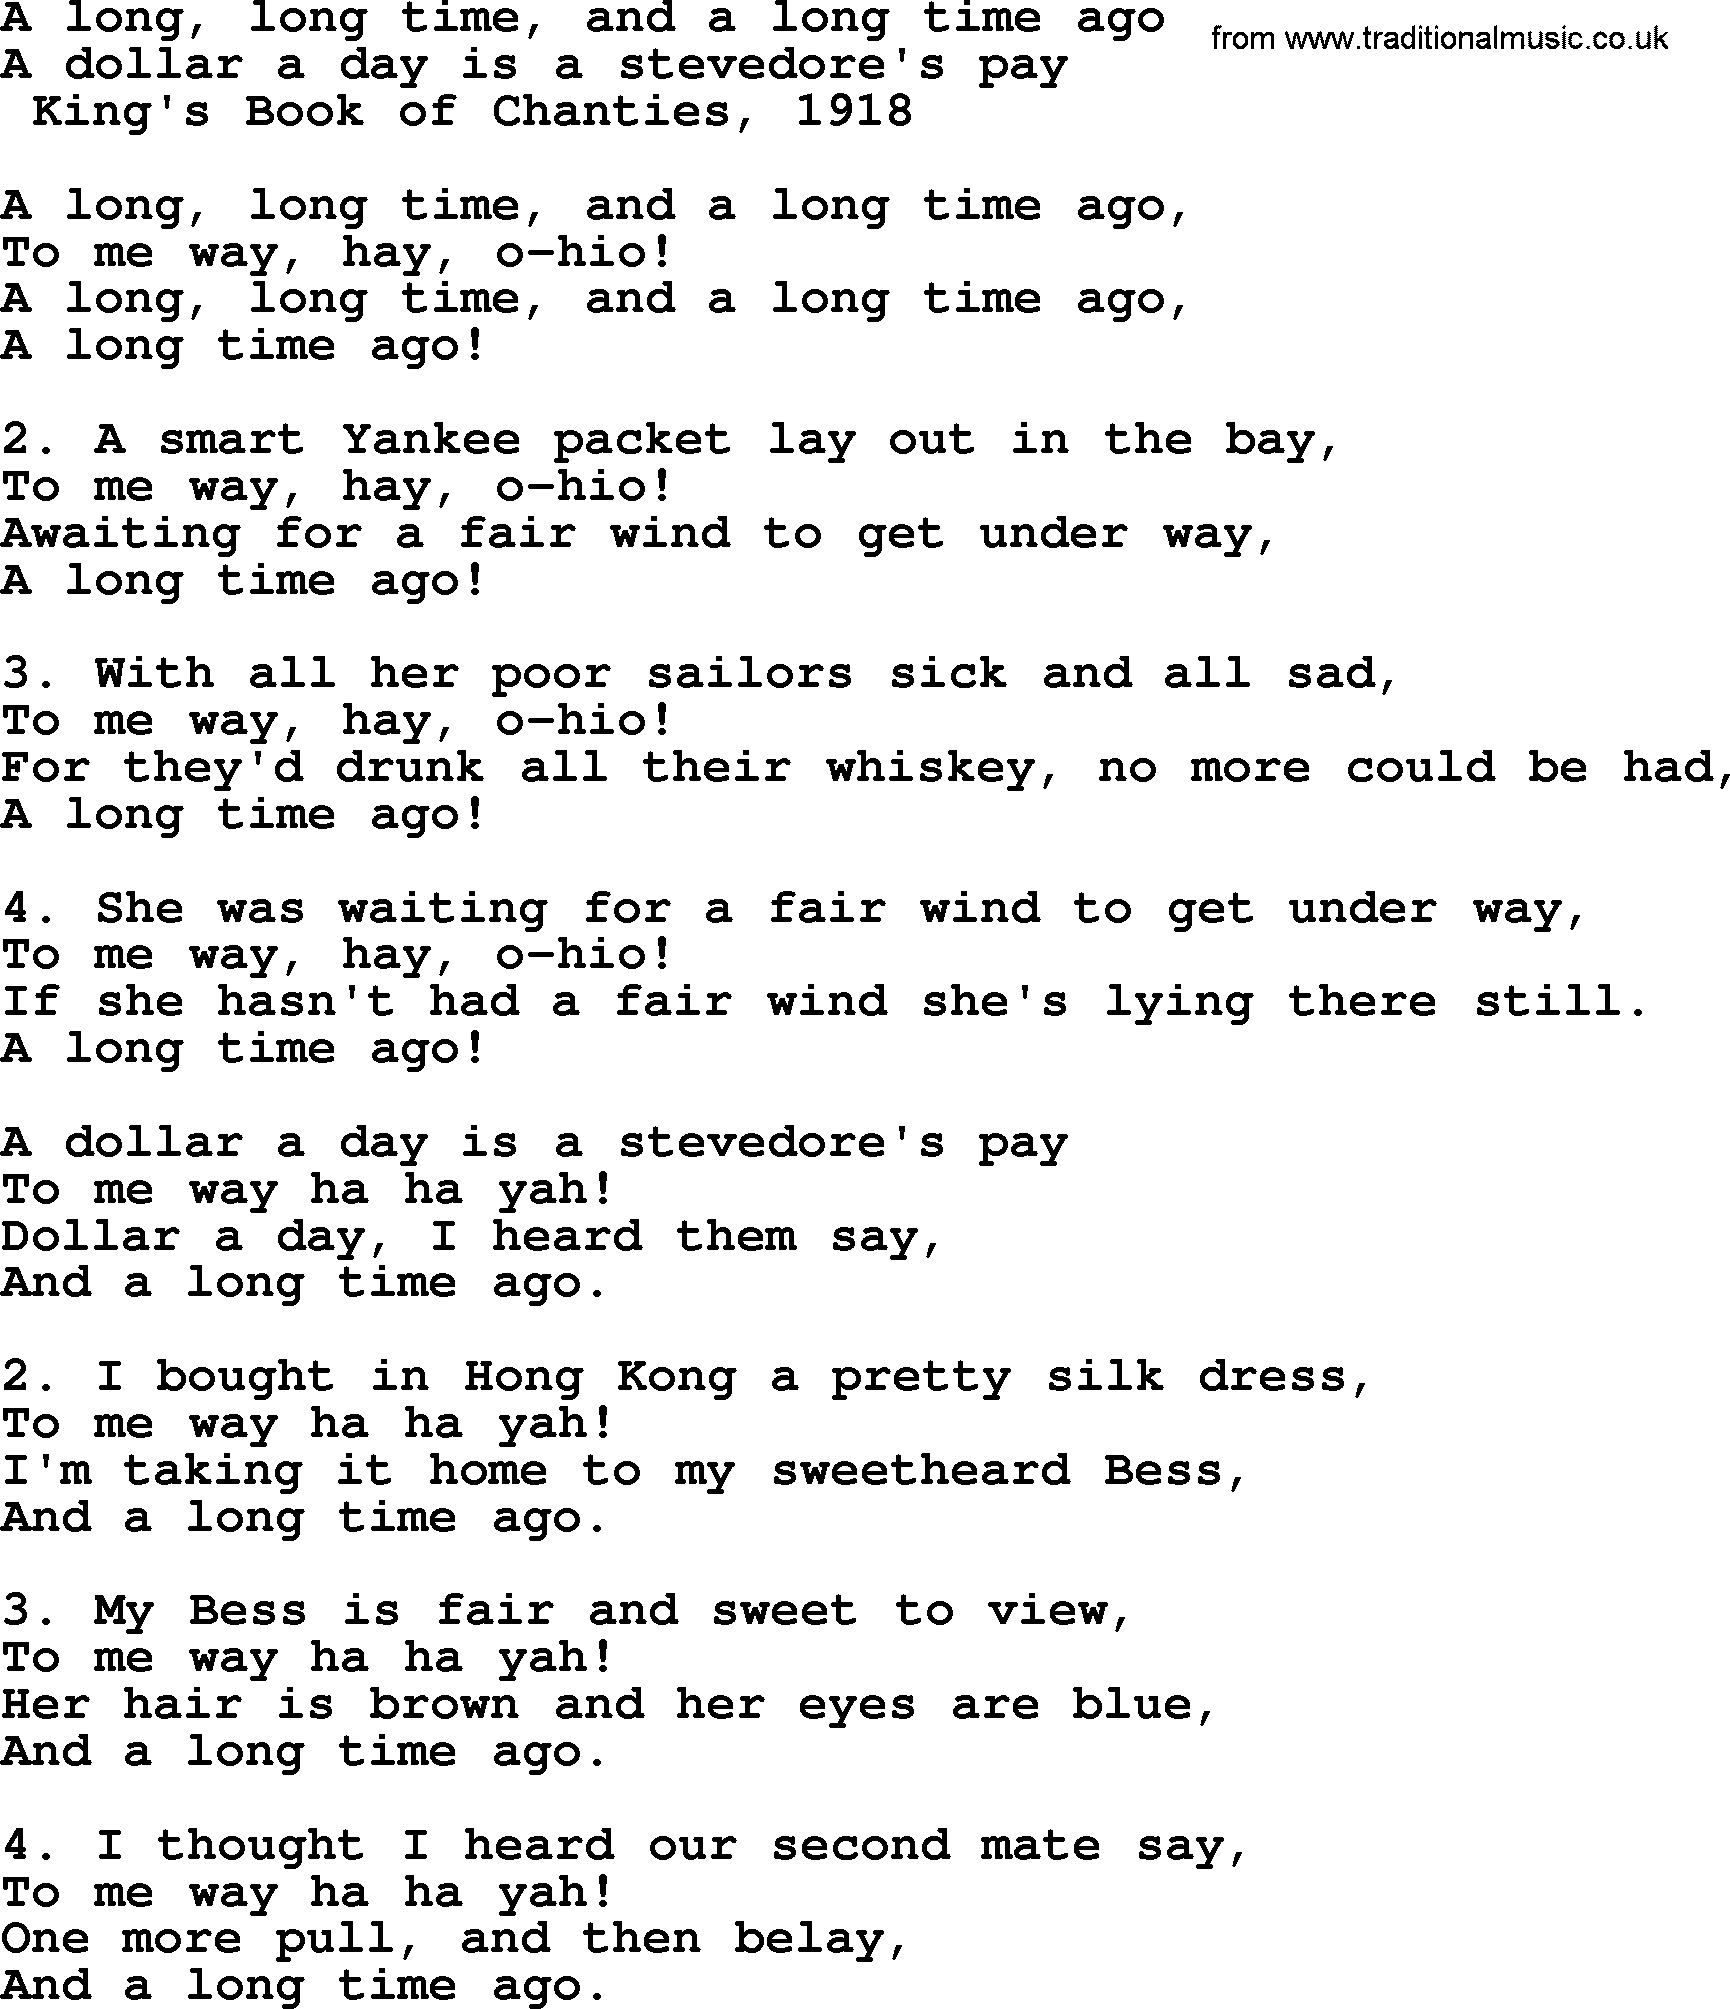 Sea Song or Shantie: A Long Long Time And A Long Time Ago, lyrics